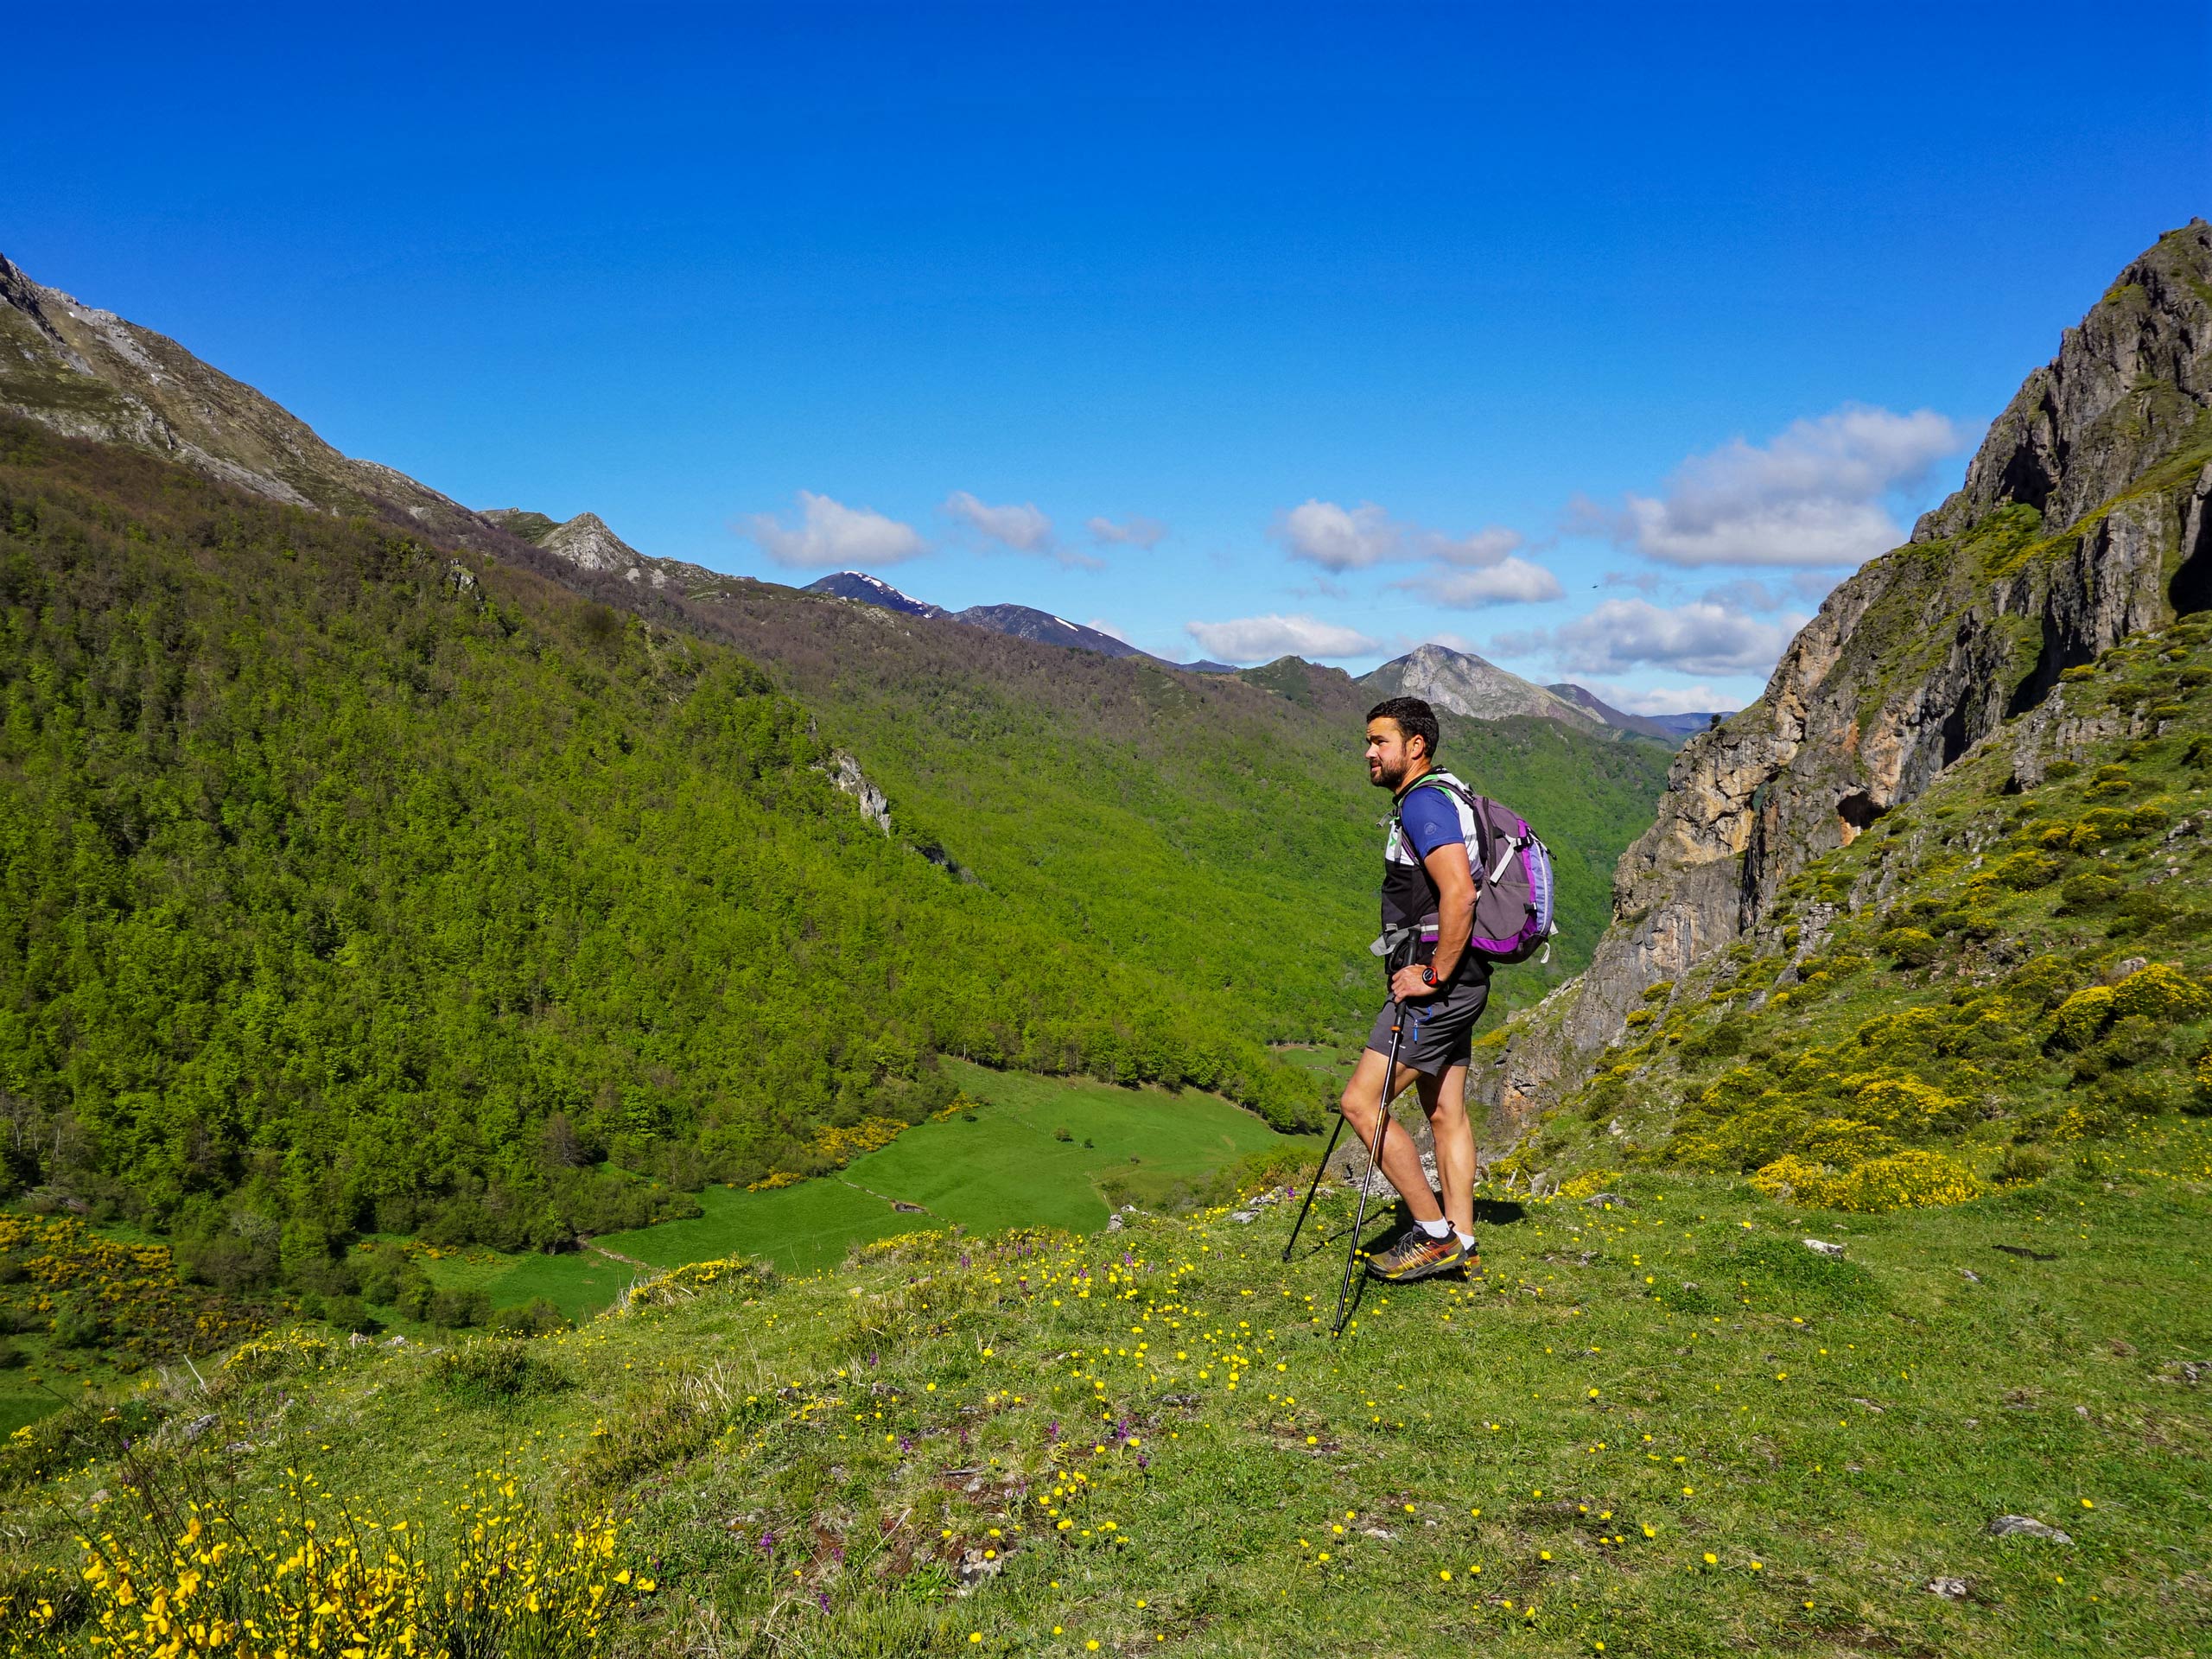 Green grass and wildflowers on plateau lookout hiking in Spain Asturias walking circular lagos